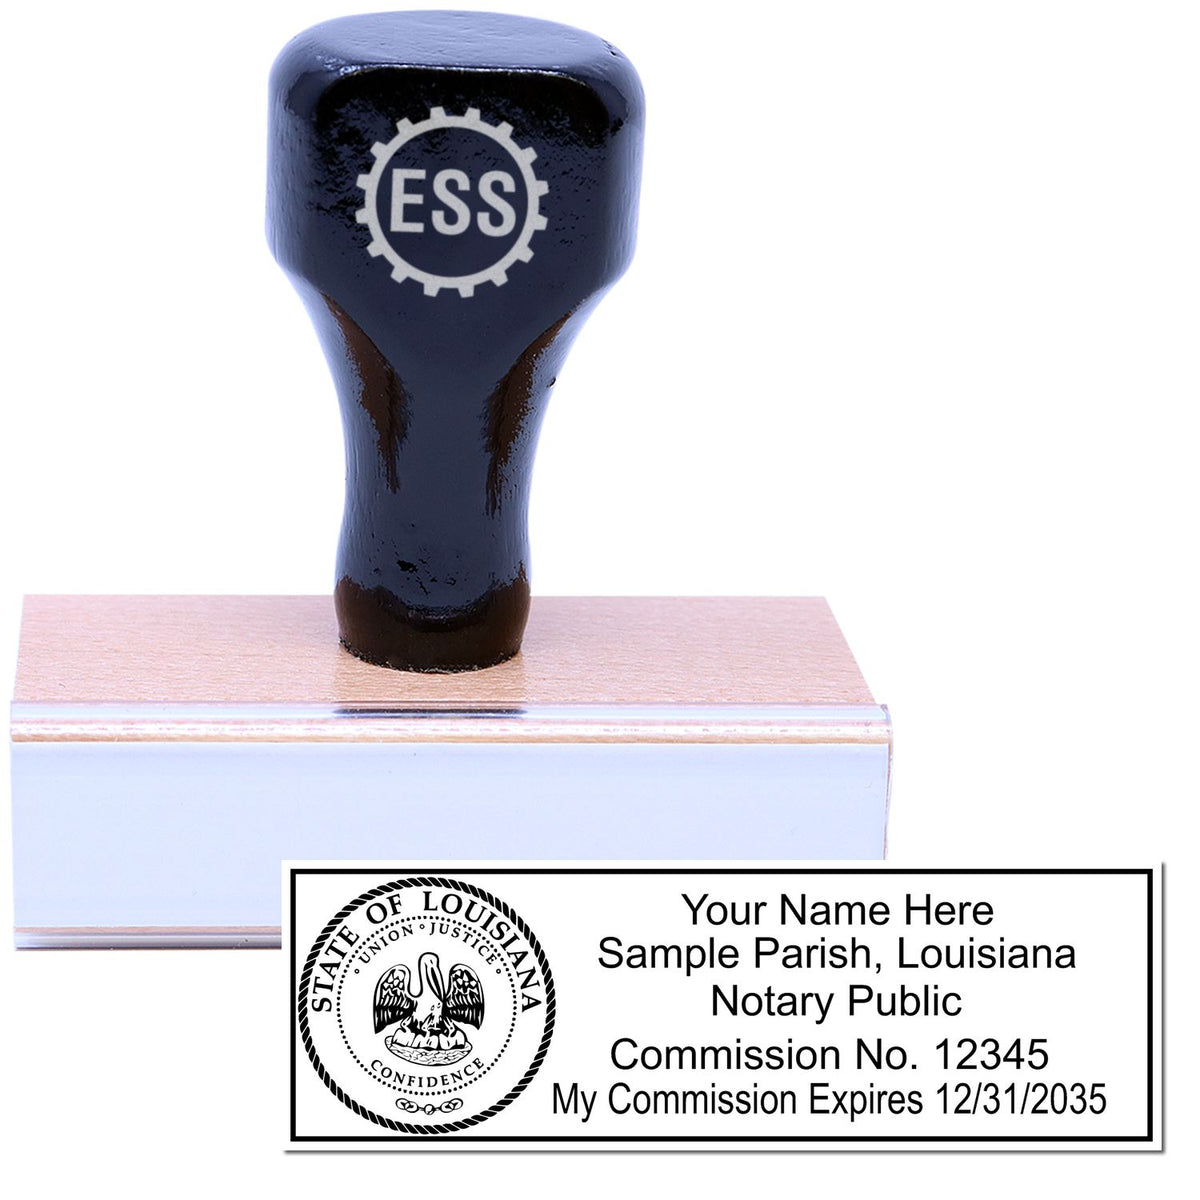 The main image for the Wooden Handle Louisiana State Seal Notary Public Stamp depicting a sample of the imprint and electronic files